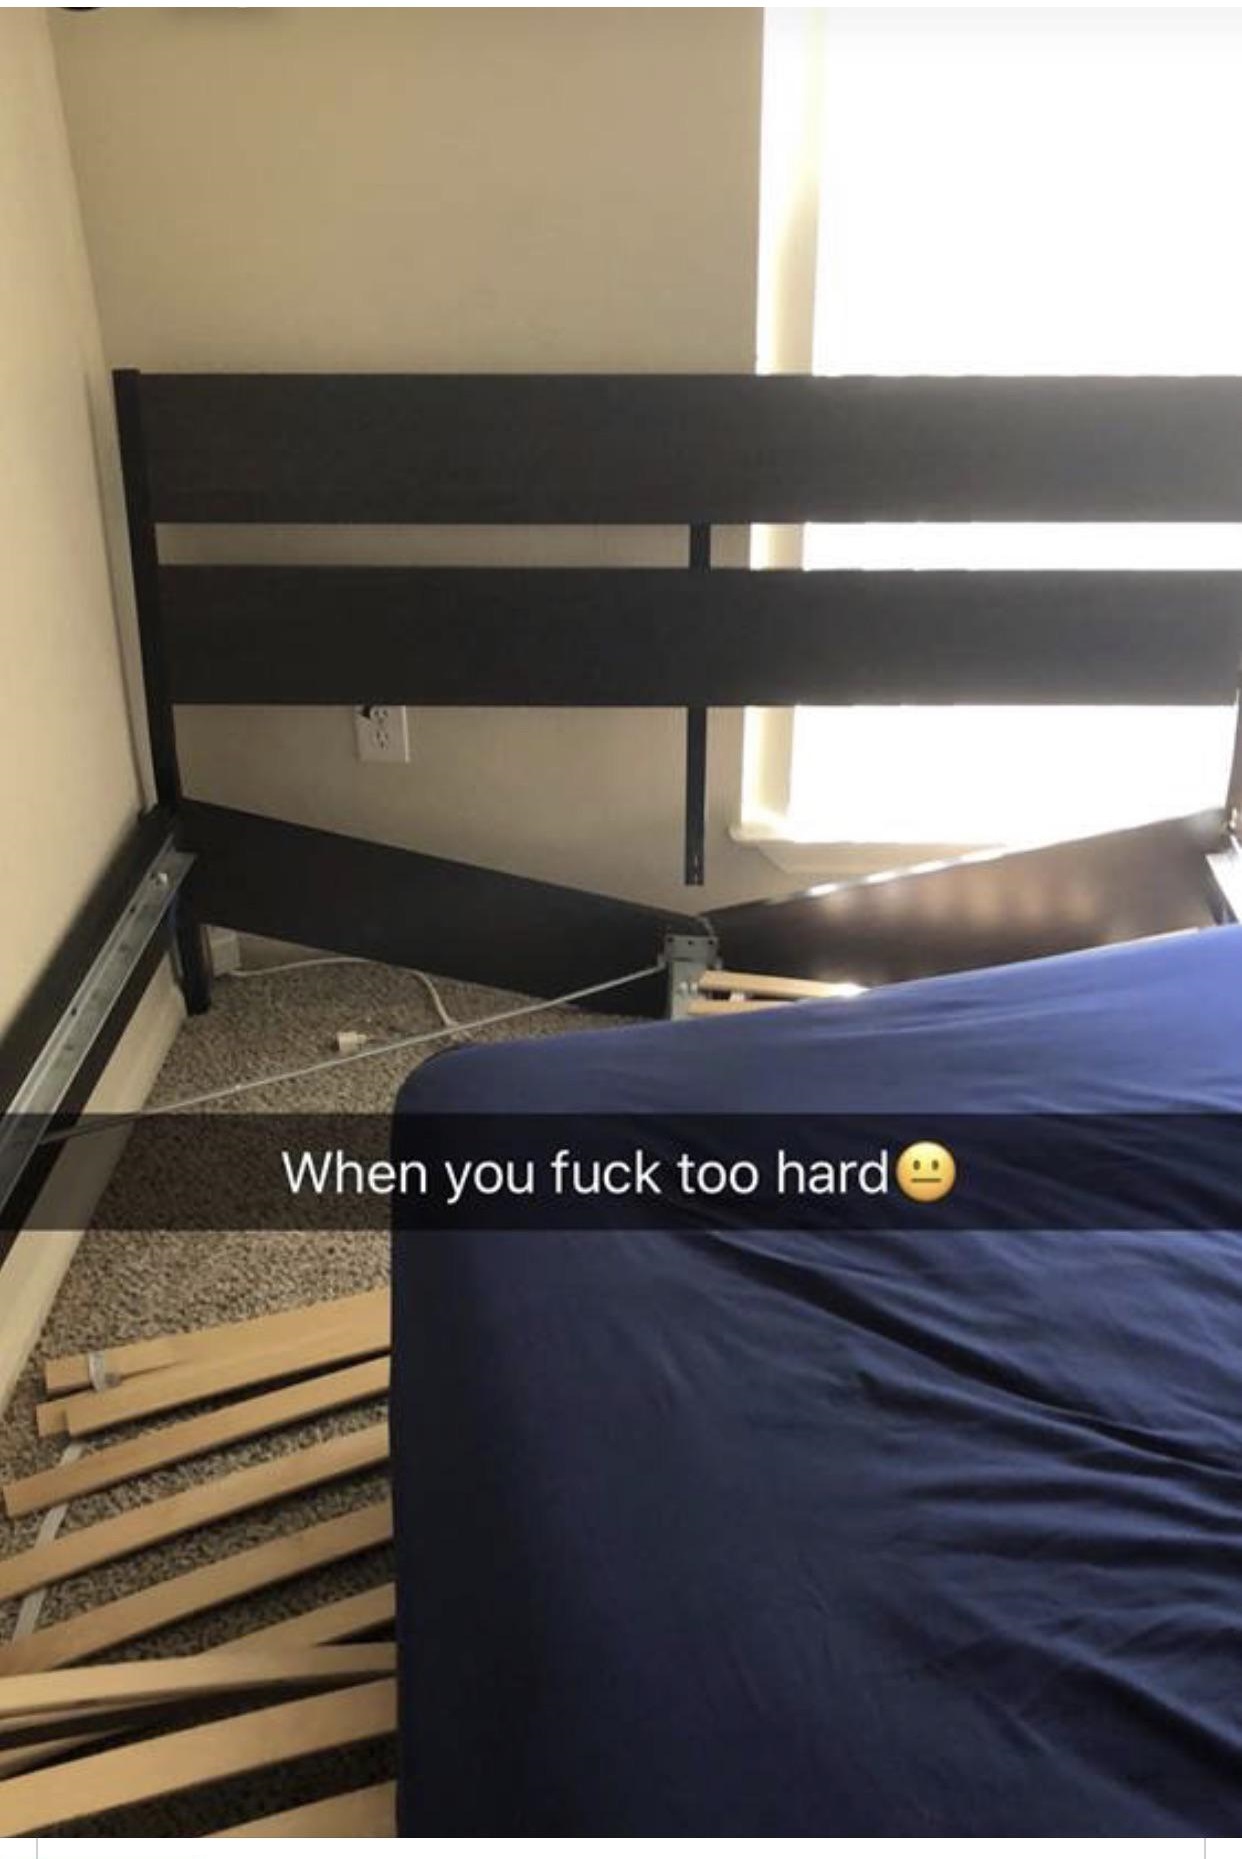 bed frame - When you fuck too hard